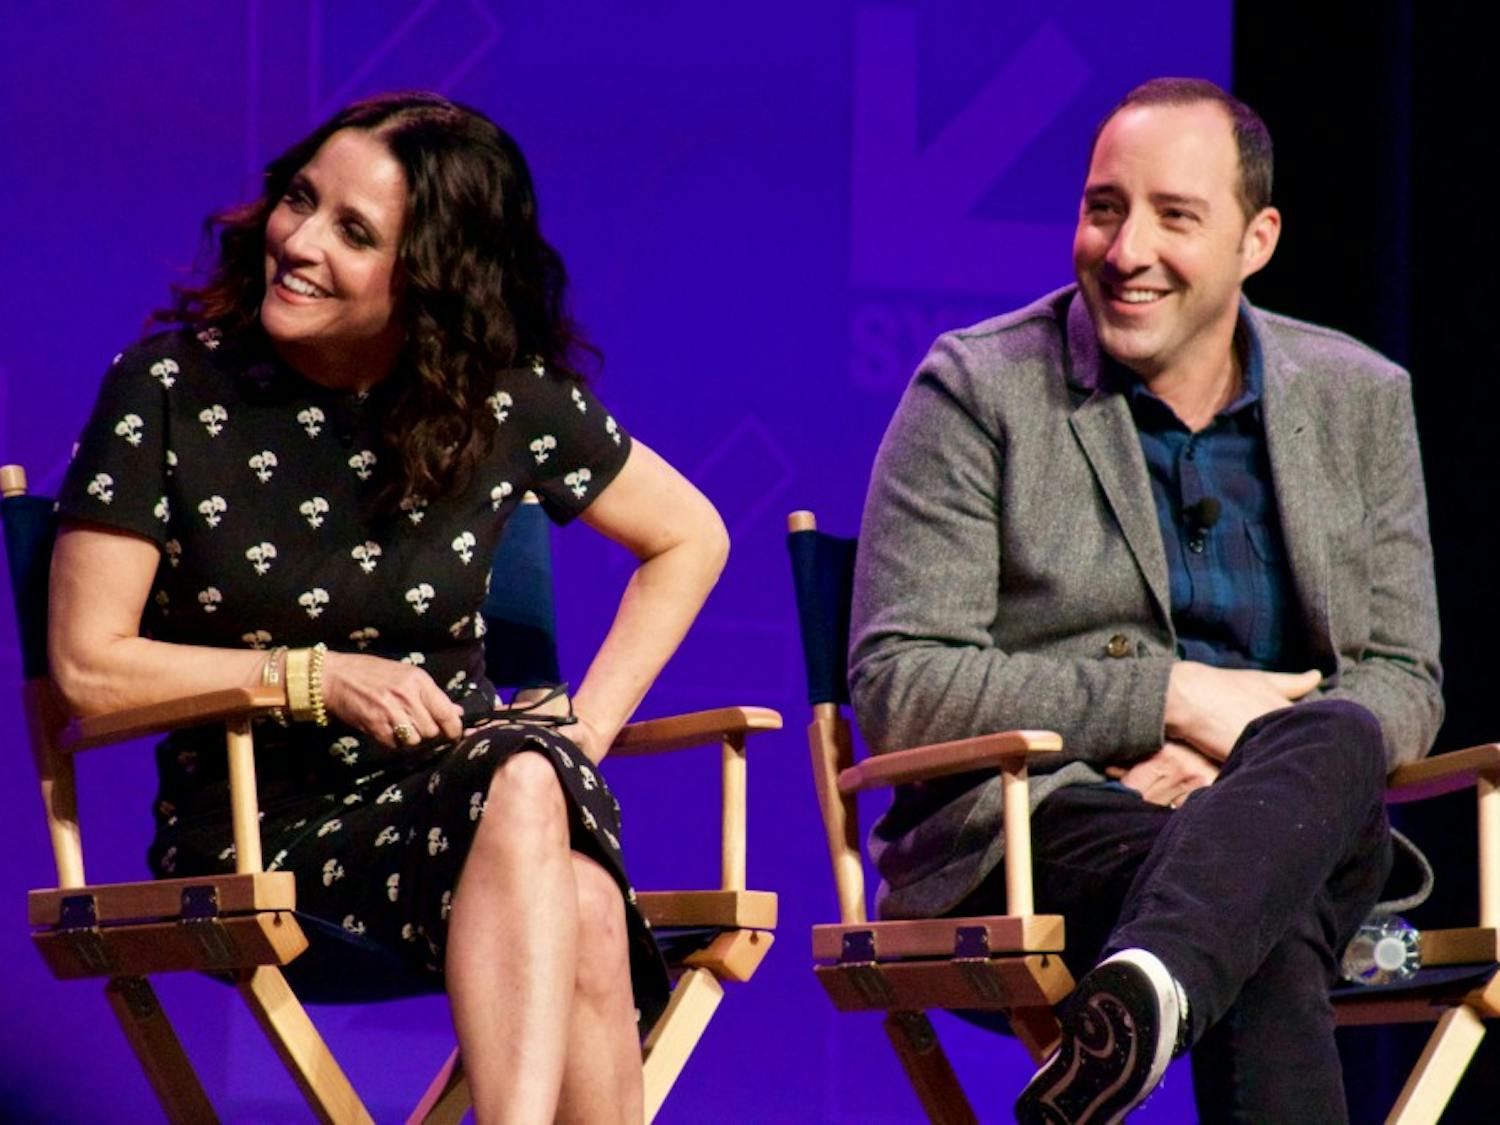 Julia Louis-Dreyfus and Tony Hale discuss politics and comedy in&nbsp;"Veep."